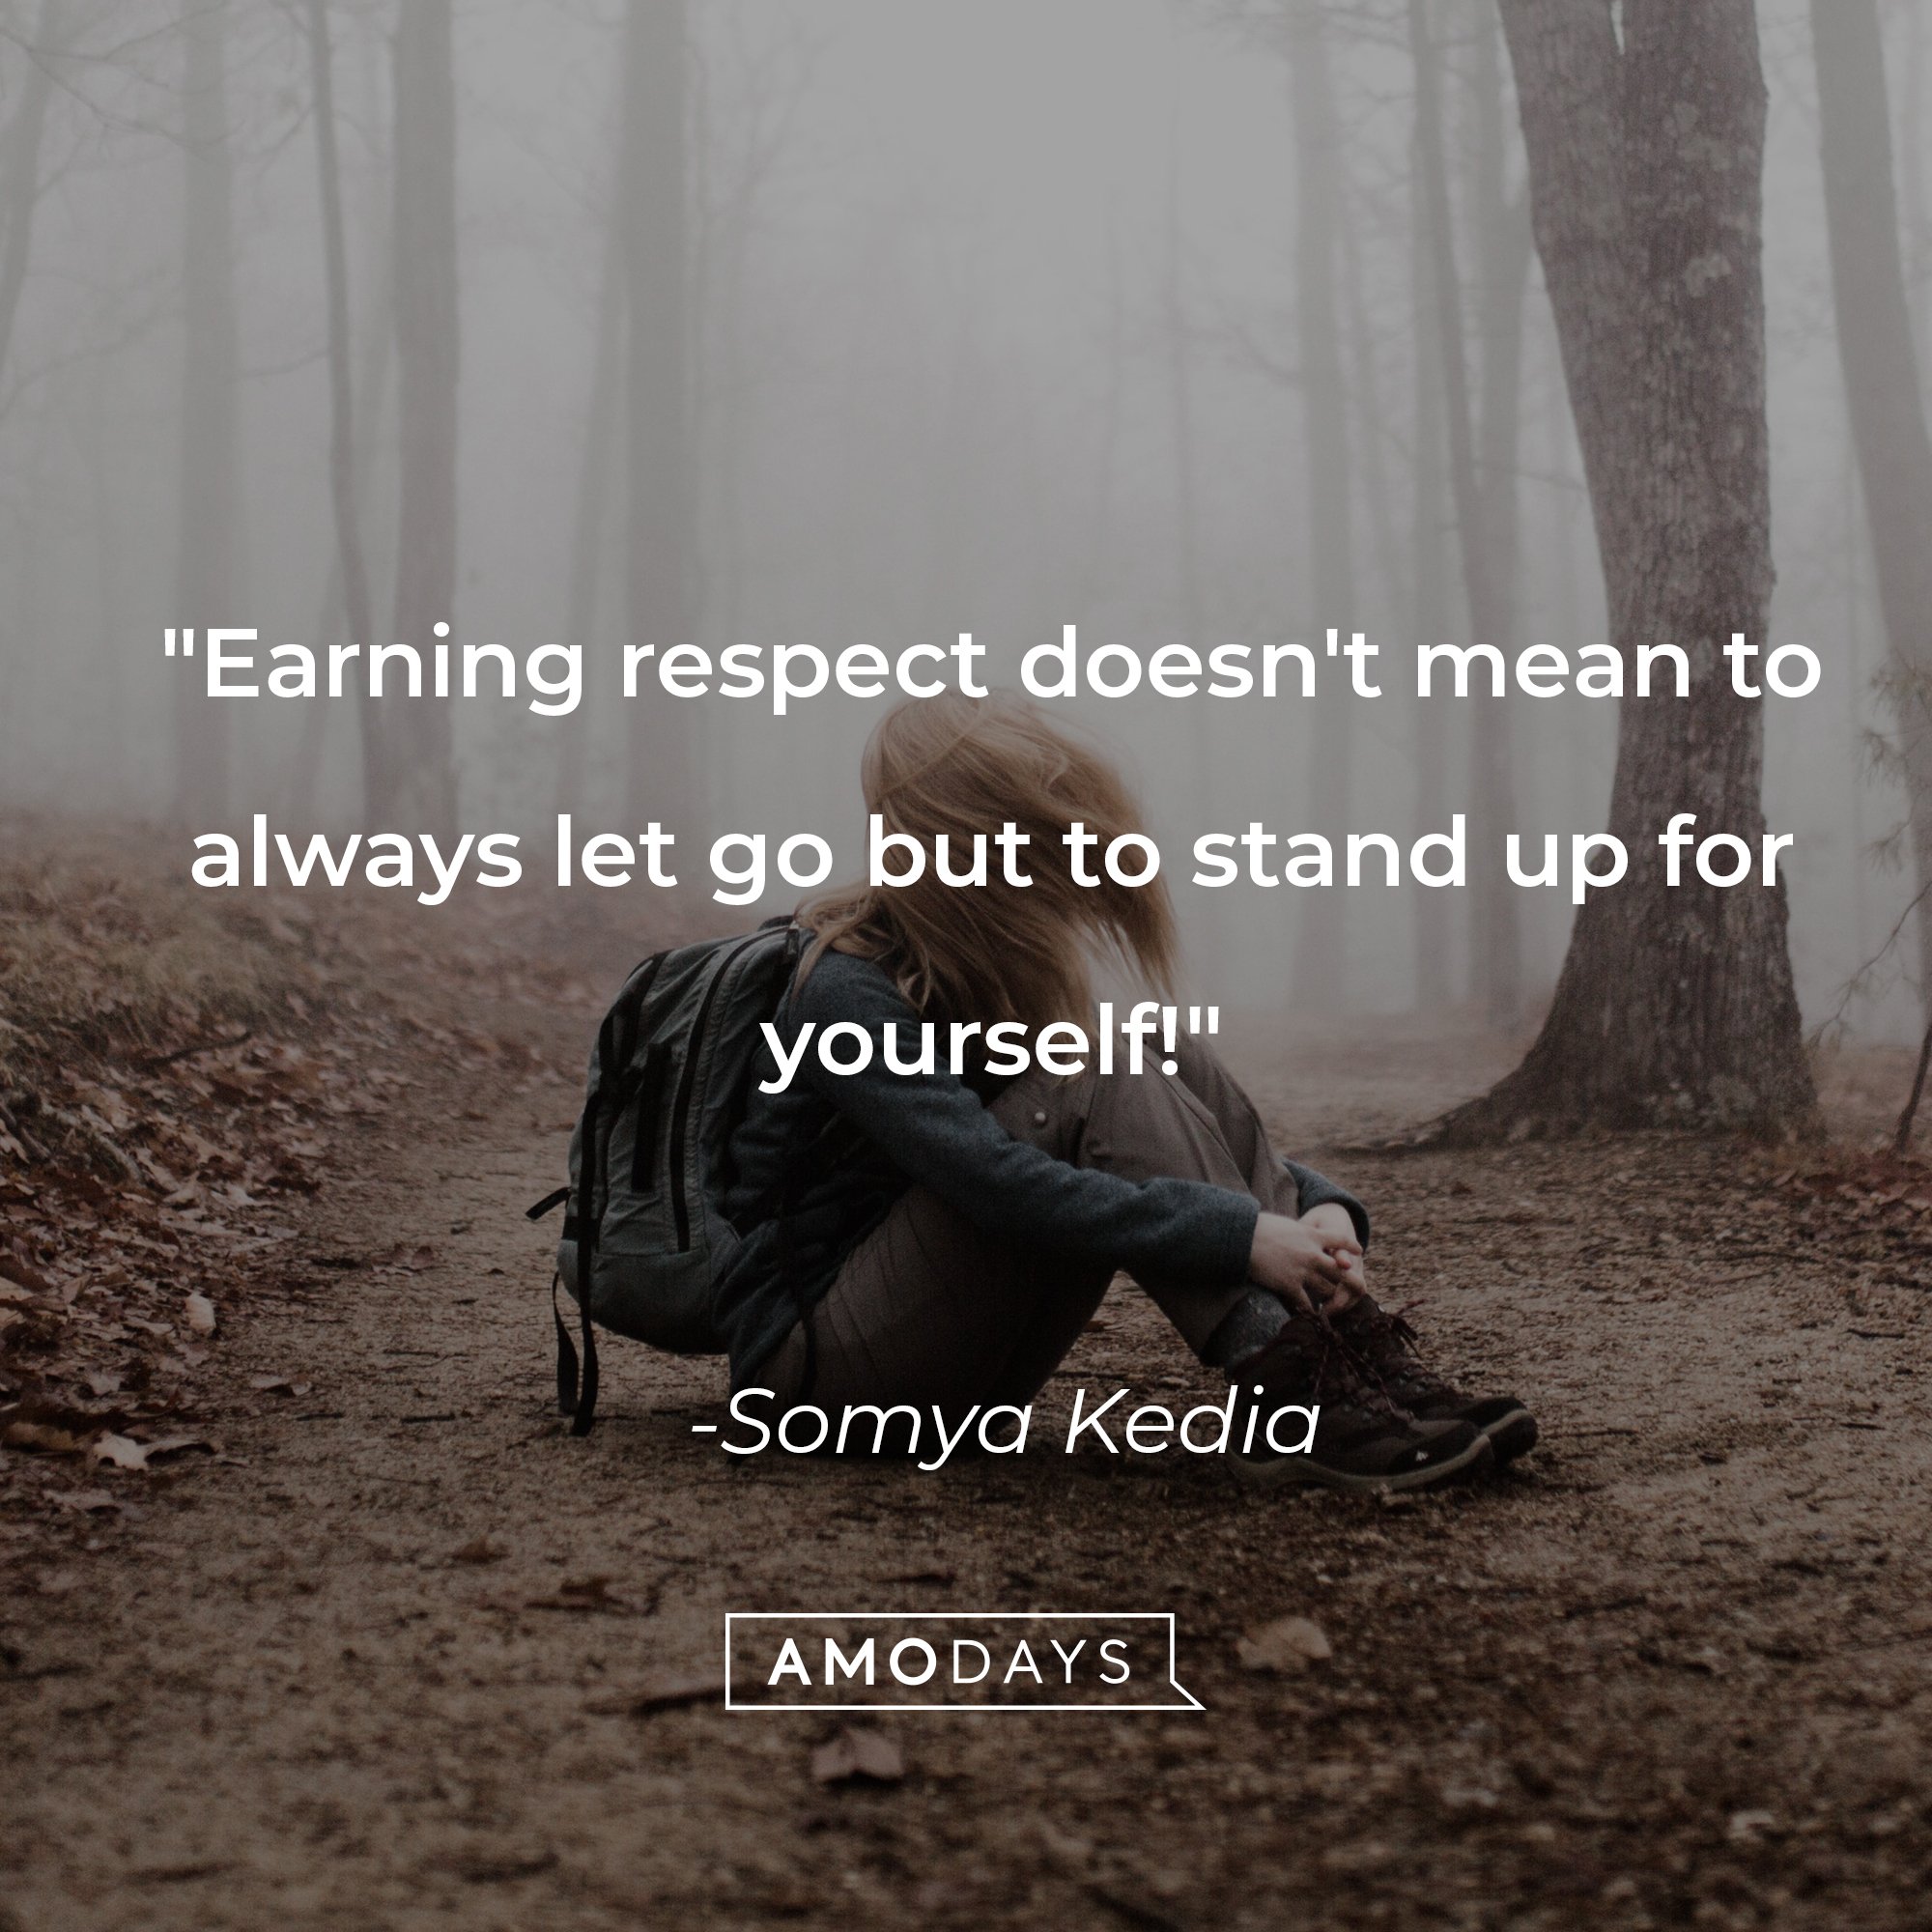 Somya Kedia's quote: "Earning respect doesn't mean to always let go but to stand up for yourself!" | Image: AmoDays